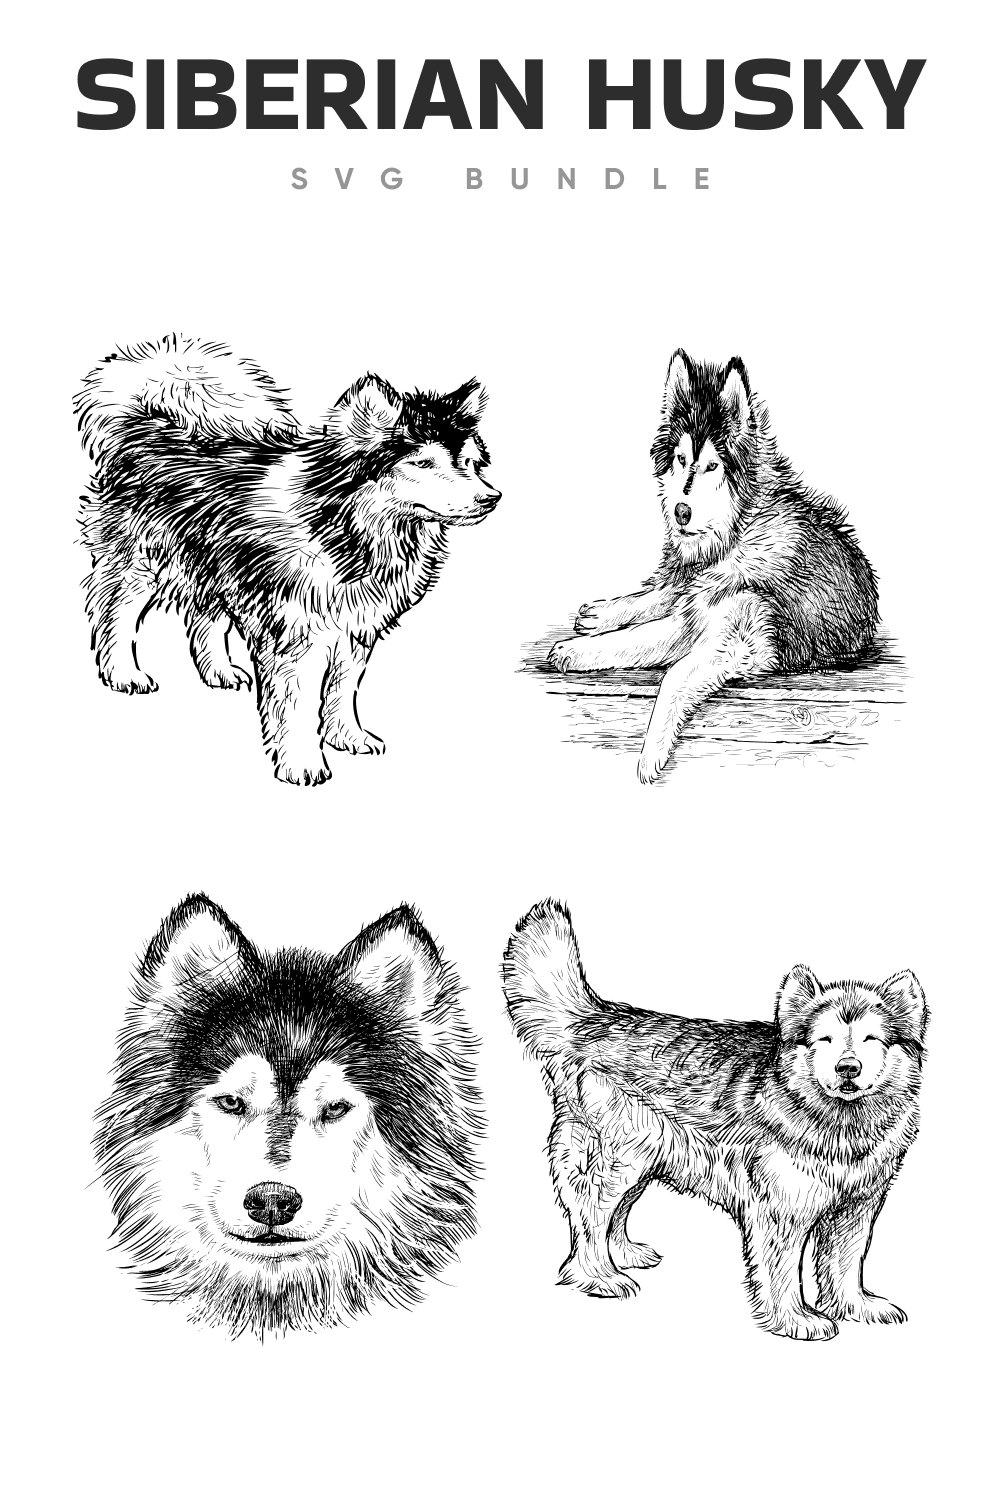 The siberian husky svg bundle is shown in black and white.